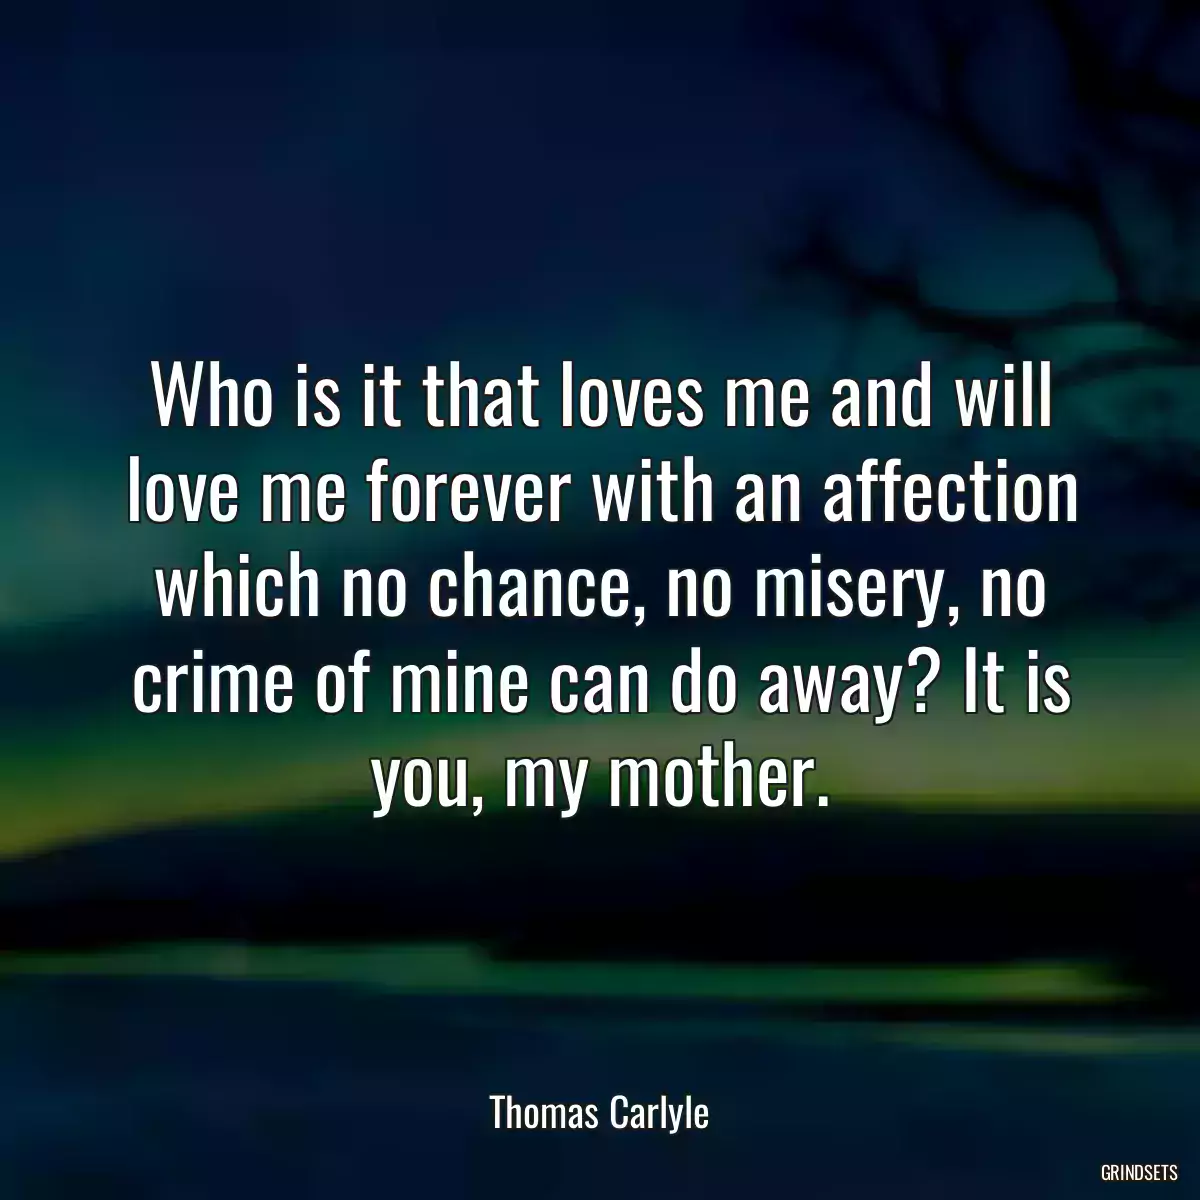 Who is it that loves me and will love me forever with an affection which no chance, no misery, no crime of mine can do away? It is you, my mother.